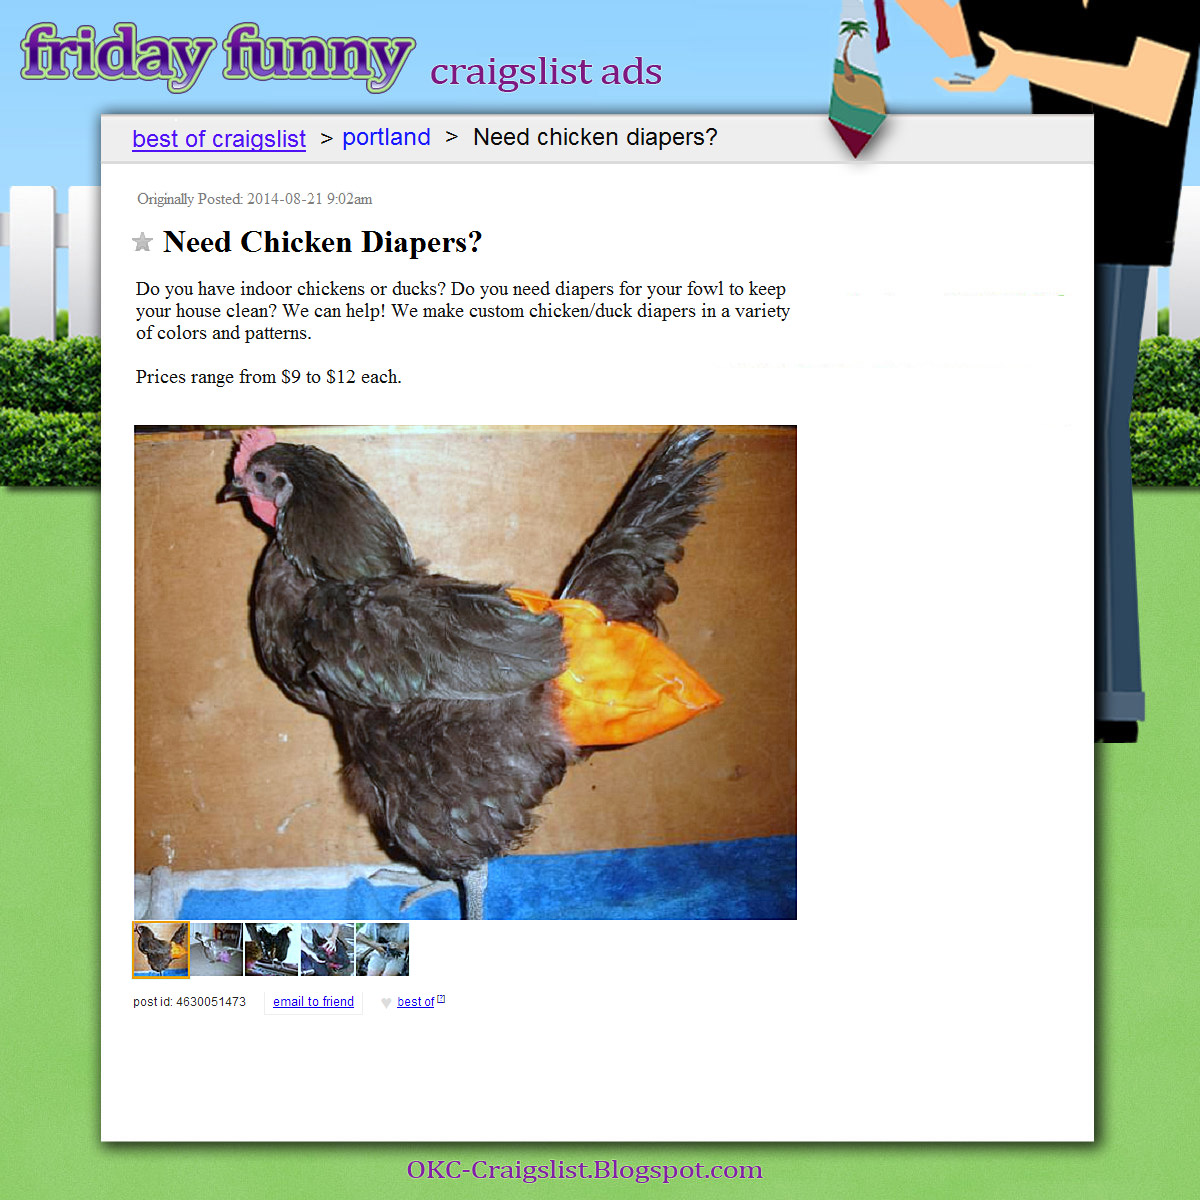 FUNNY CRAIGSLIST ADS: Need chicken diapers? | Craigslist ...